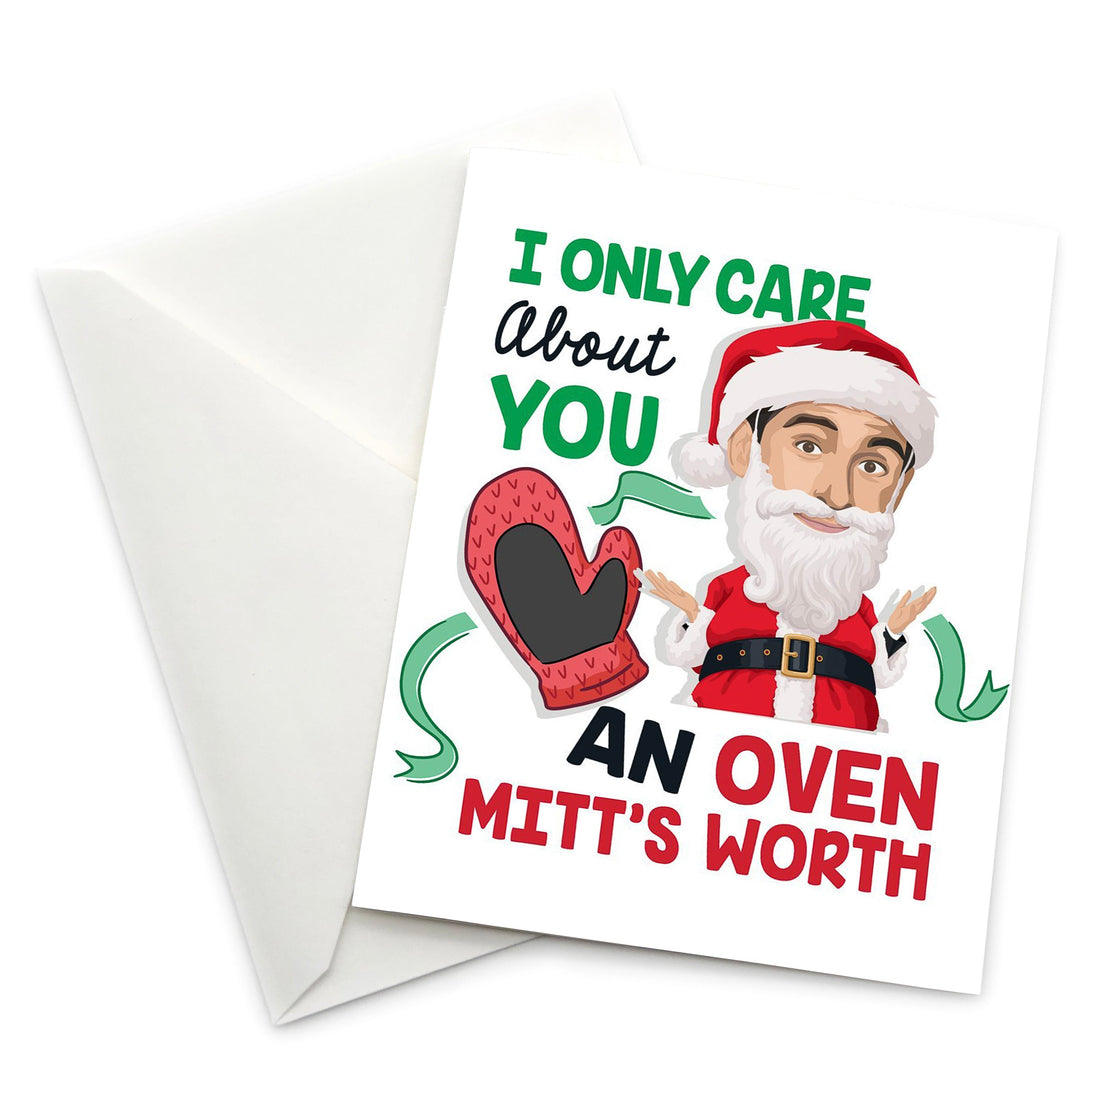 “I Only Care About You an Oven Mitt's Worth” Holiday Card - Official The Office Merchandise